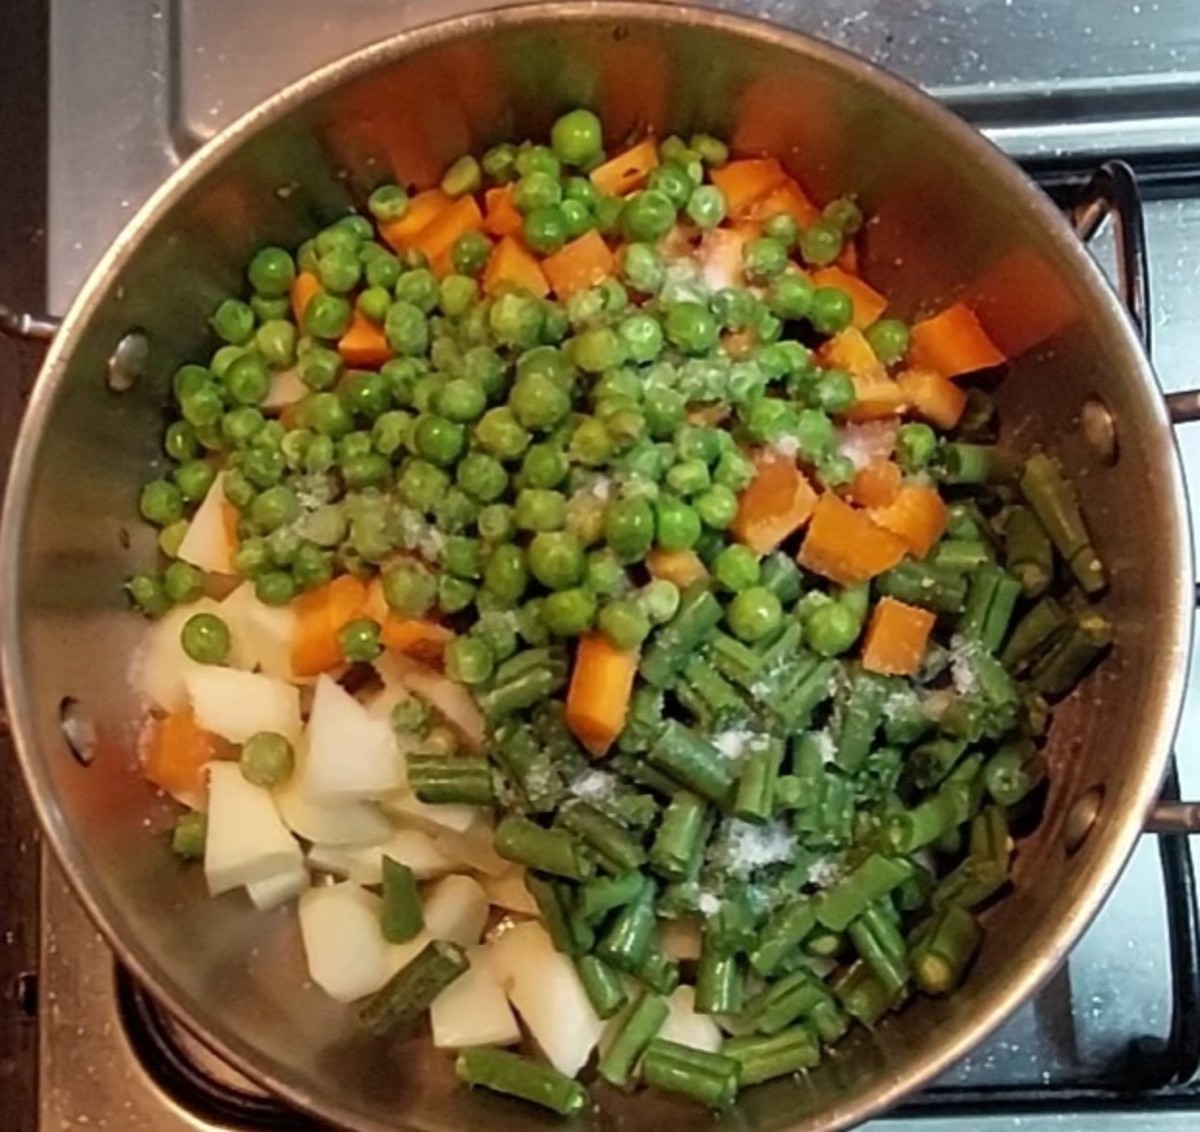 Add 1 cup peeled and cubed potatoes, 1 cup chopped French beans, 1 cup cubed carrots and 1/2 cup peas. Add salt to taste.